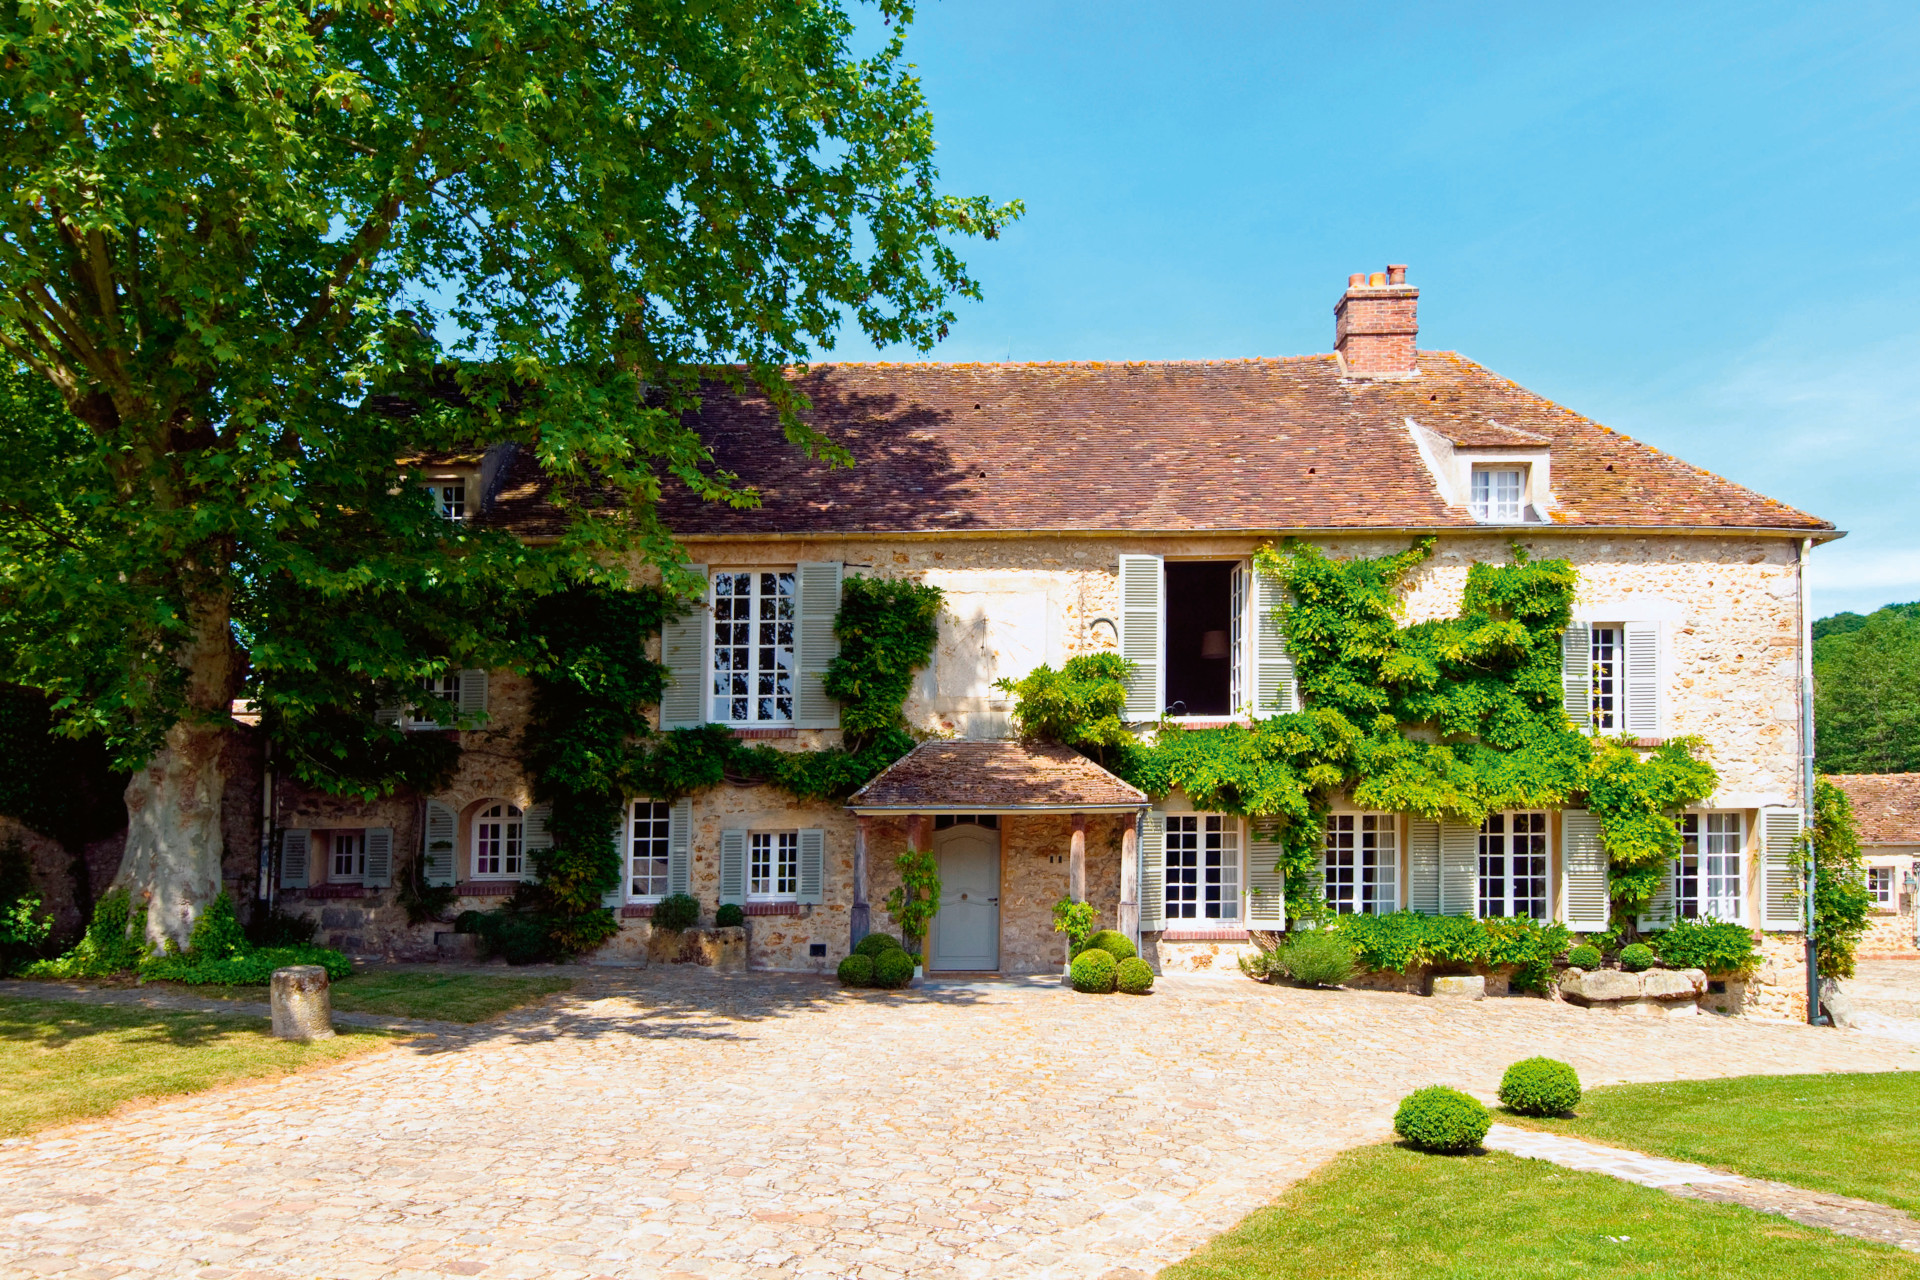 The Duke and Duchess of Windsor's country home Le Moulin de la Tuilerie in Gif sur Yvette, France